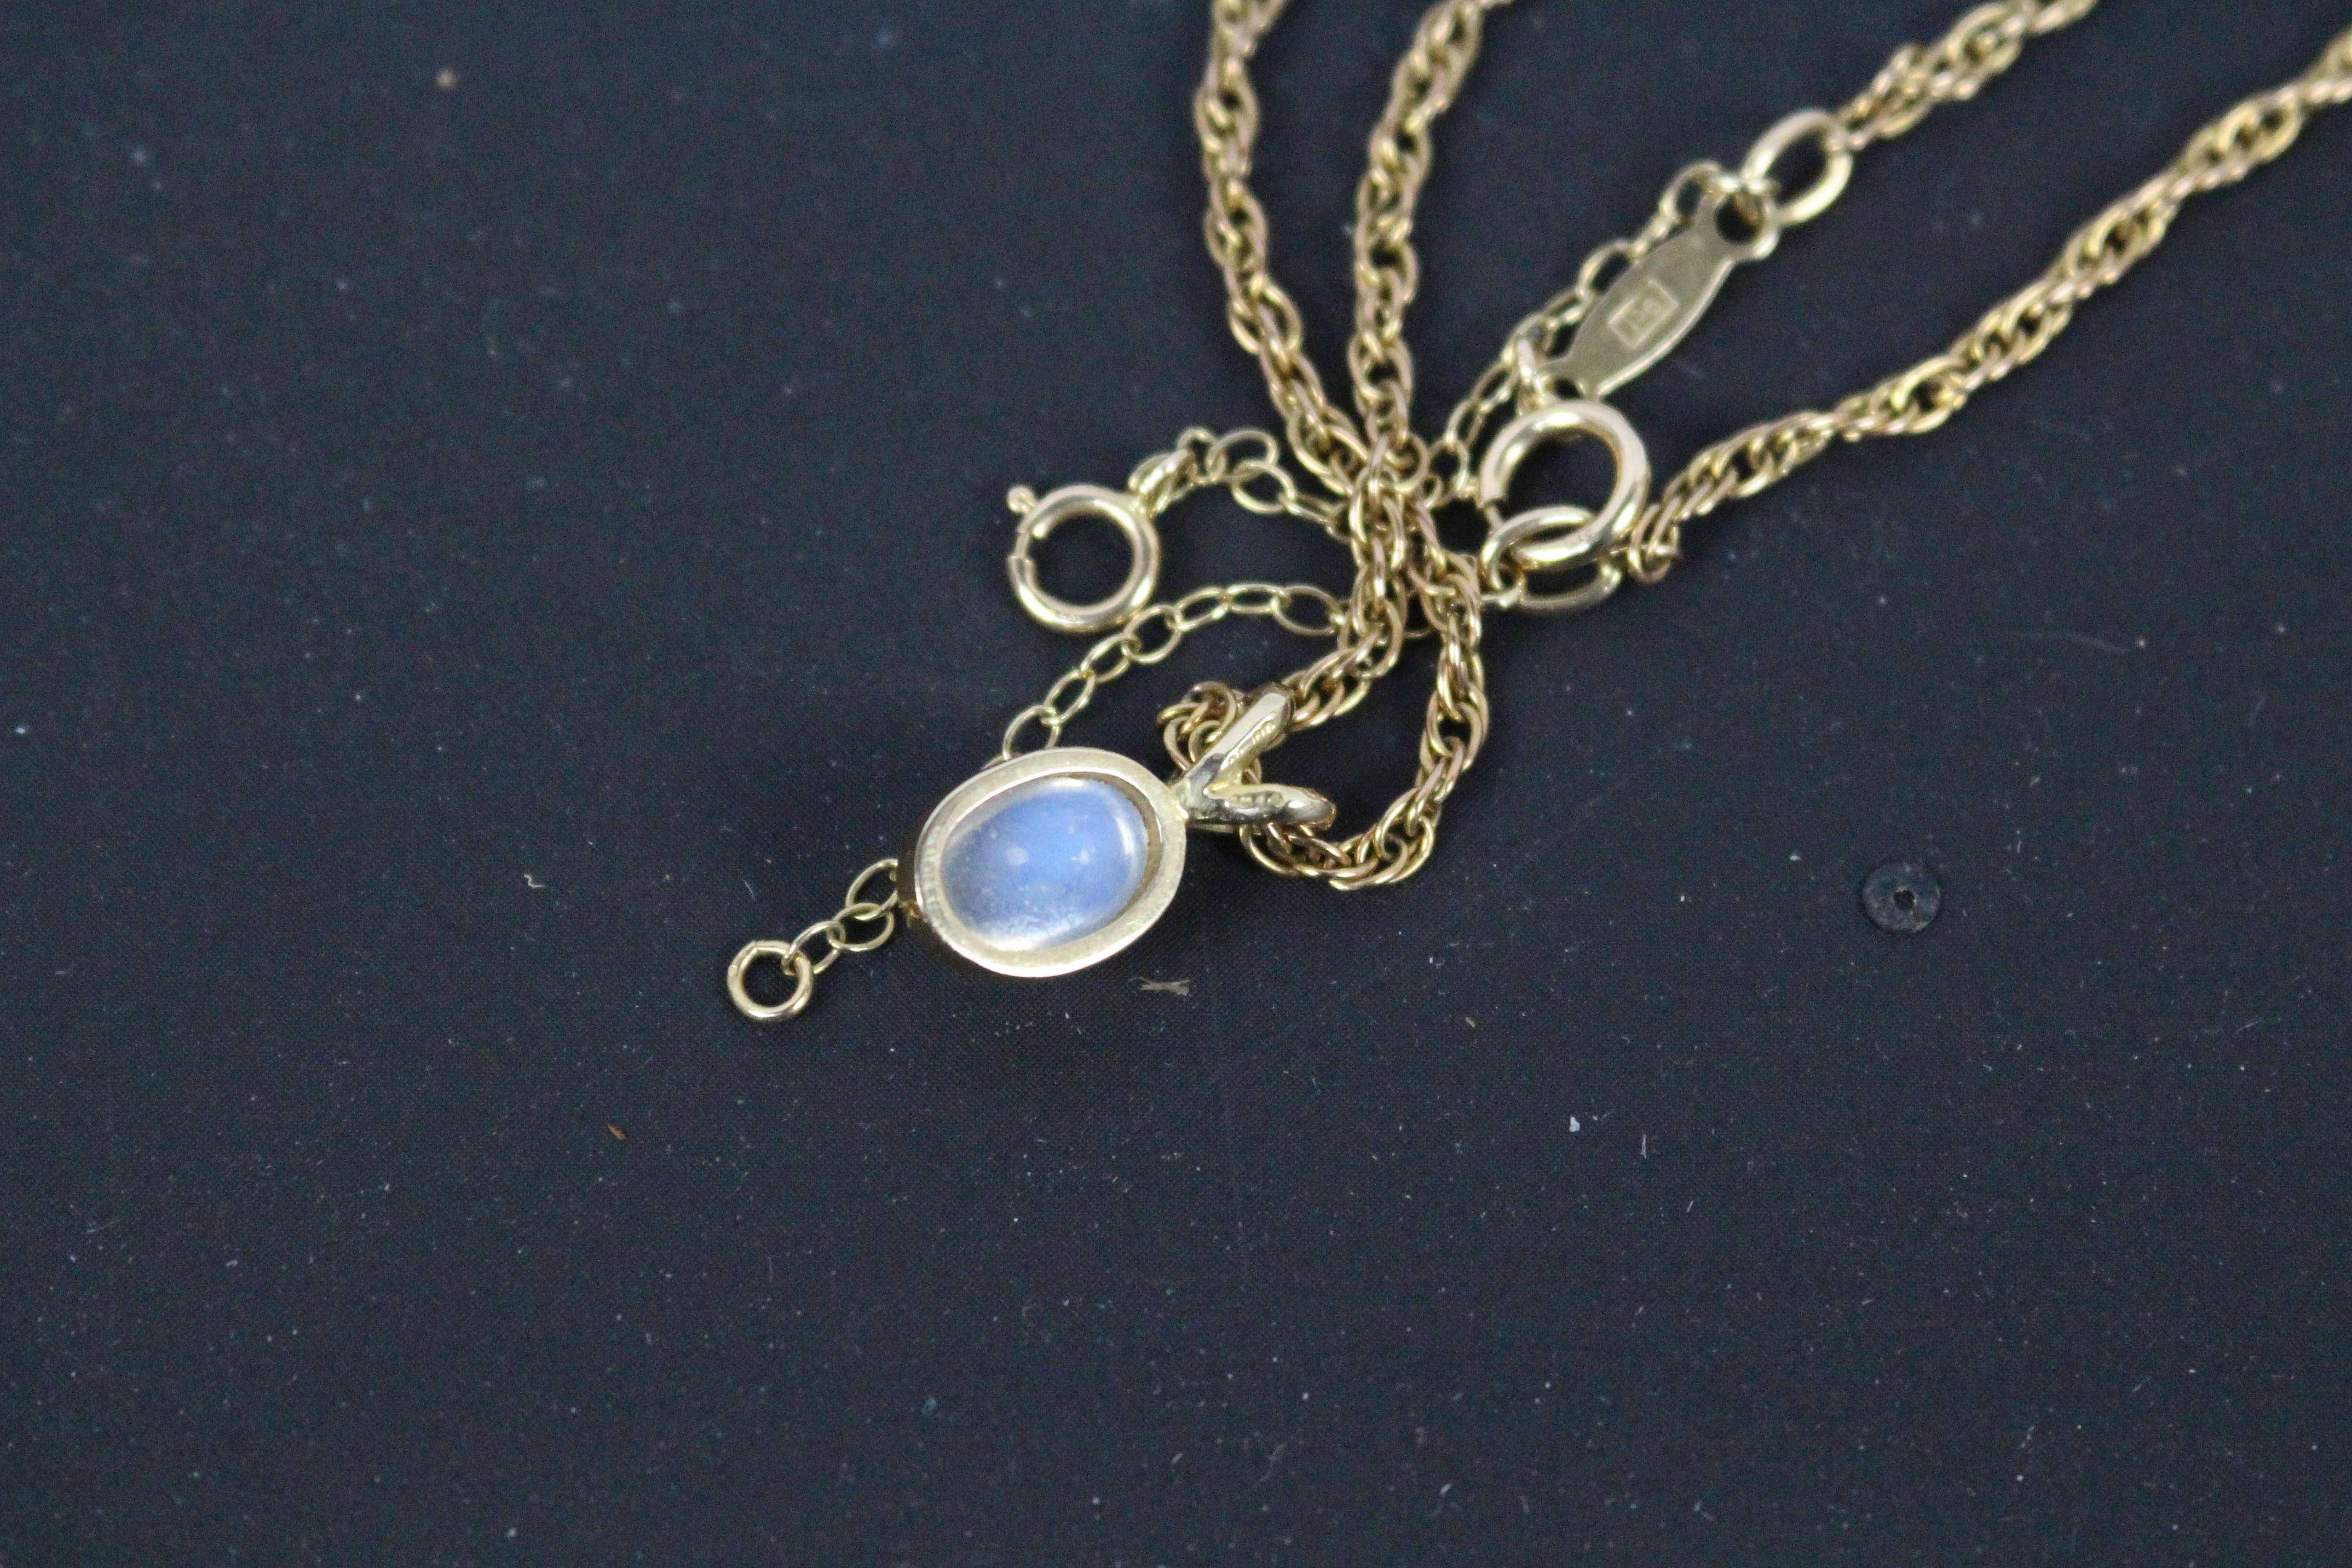 A 9ct yellow gold and cabochon moonstone pendant on 9ct gold Prince Of Wales chain (54 cm length), - Image 4 of 4